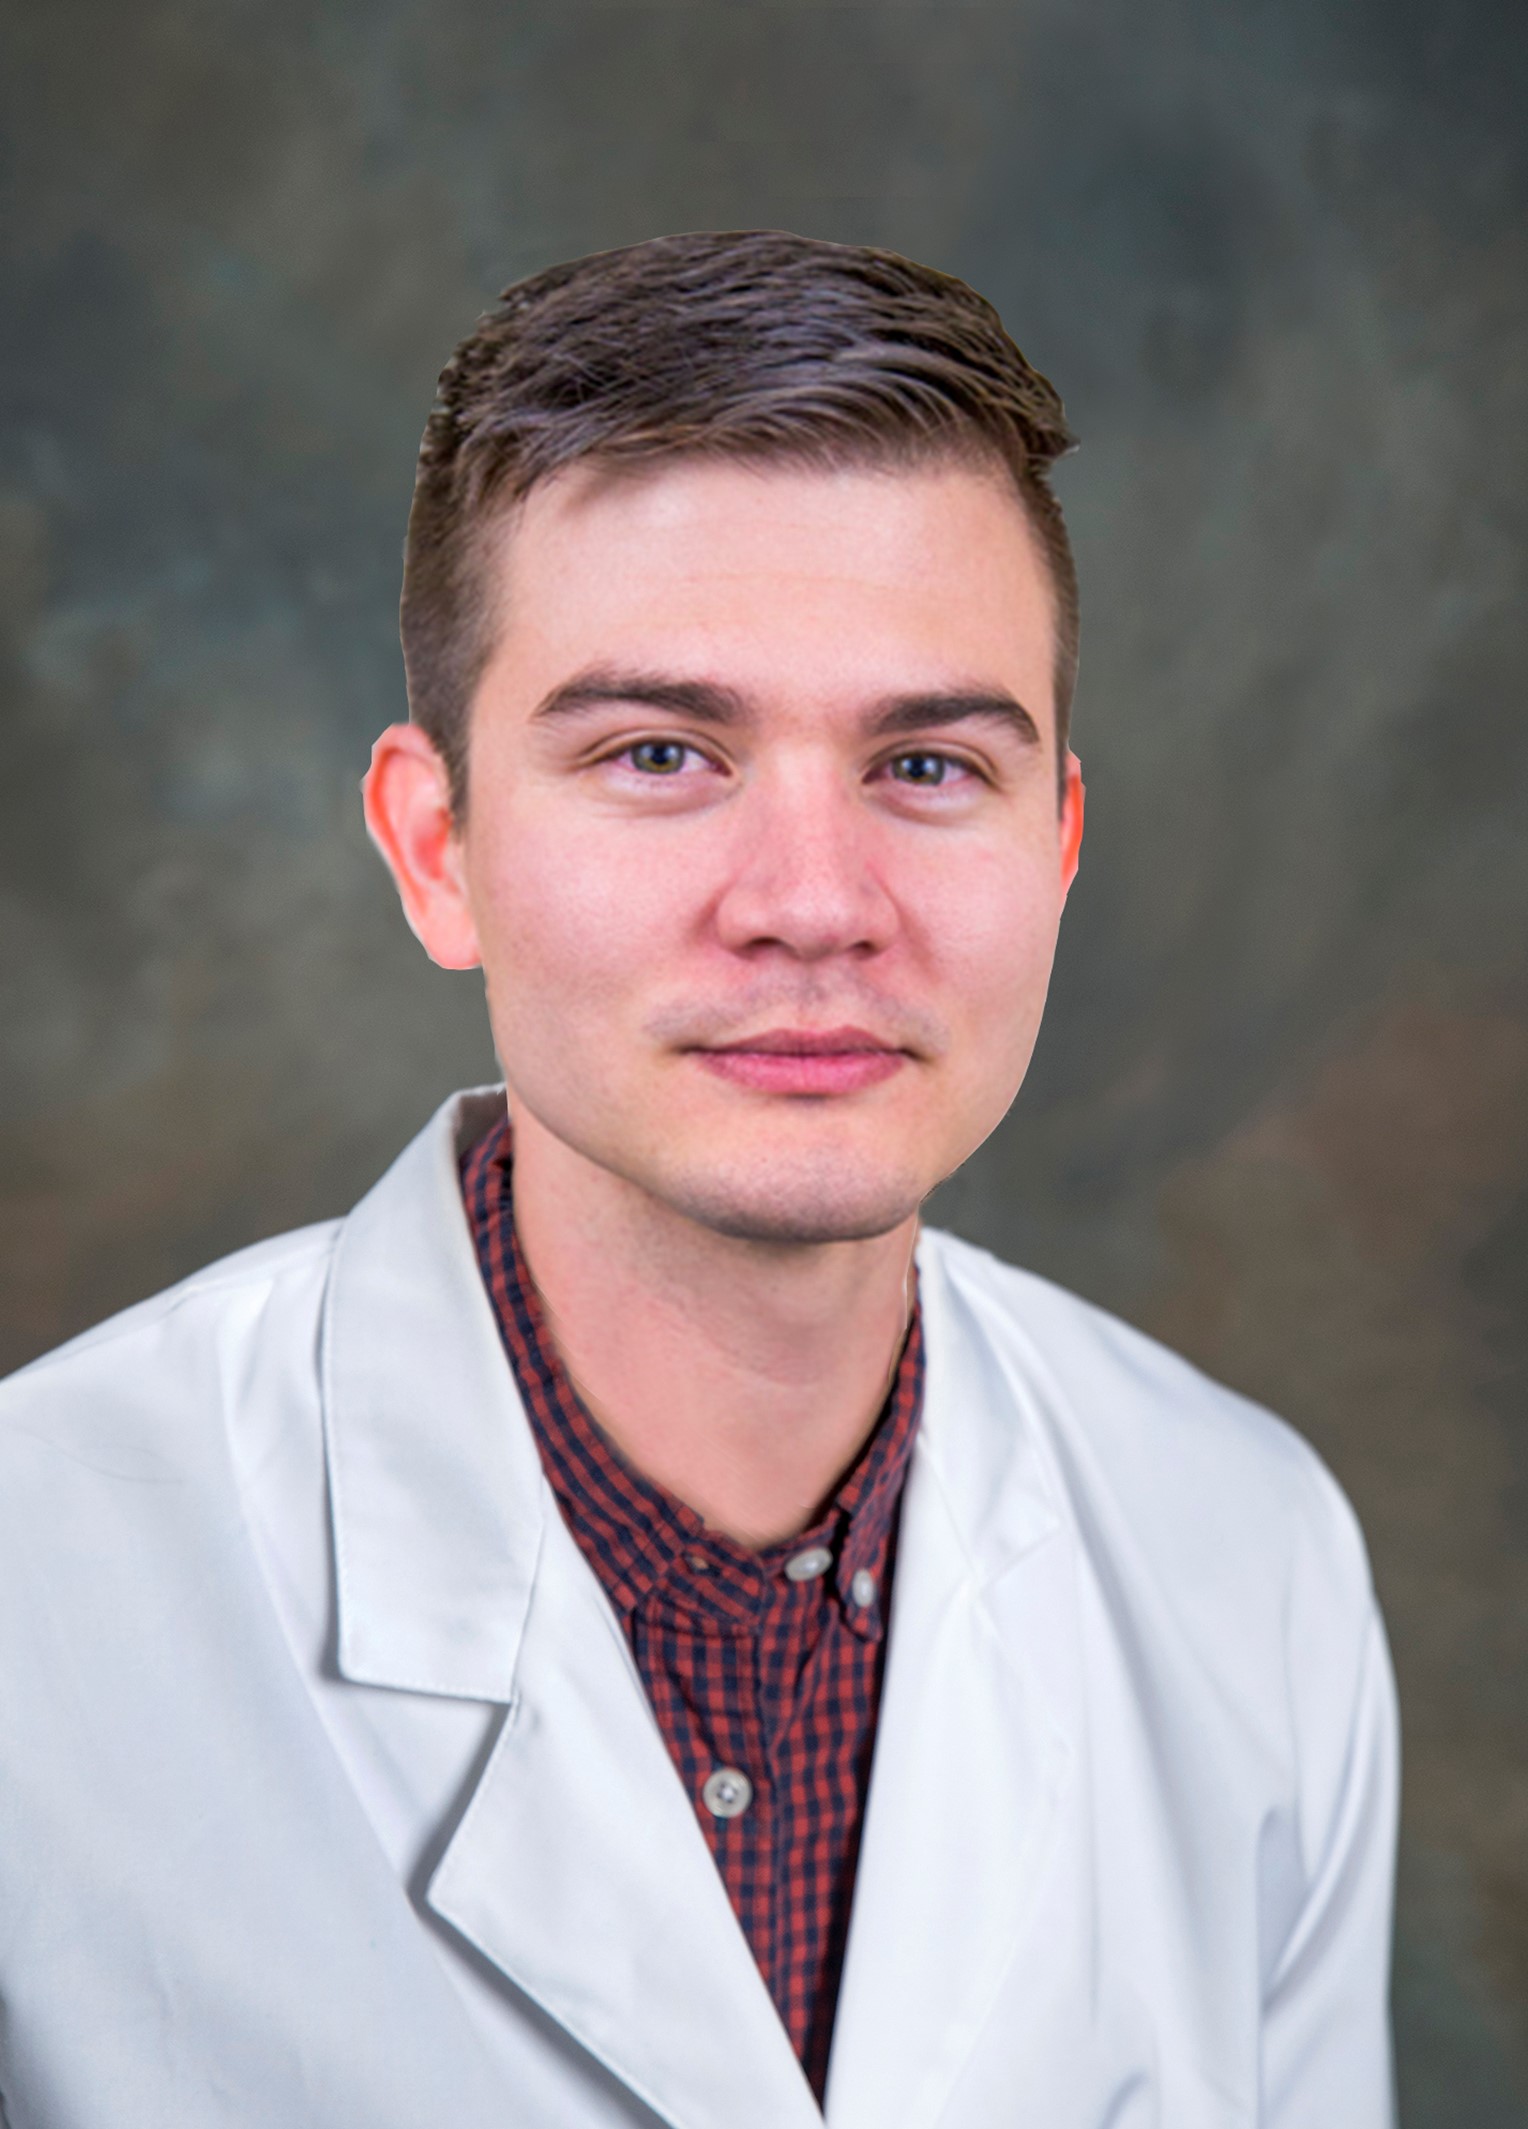 Dr. Austin Healy, PGY-6, 1st Year Resident, Plastic and Reconstructive Surgery